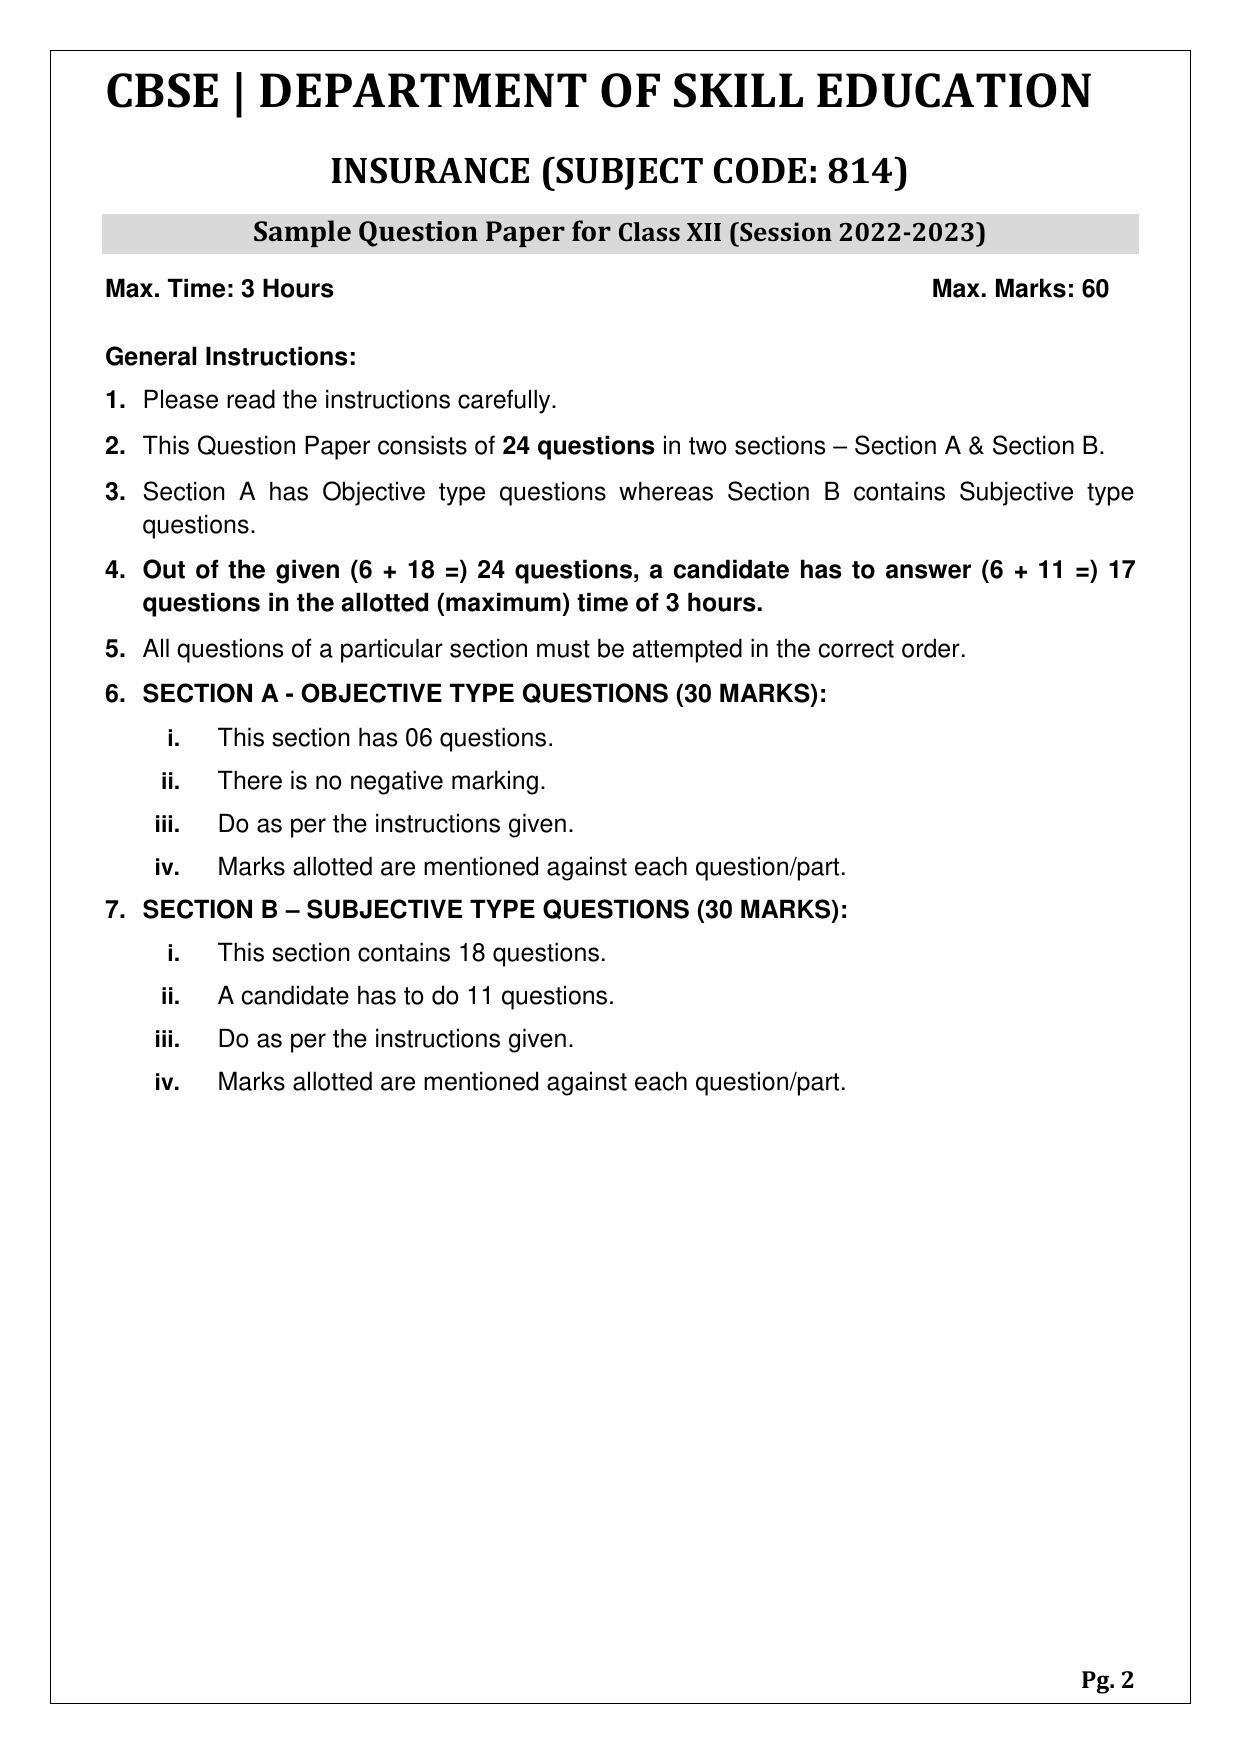 CBSE Class 12 Insurance (Skill Education) Sample Papers 2023 - Page 2